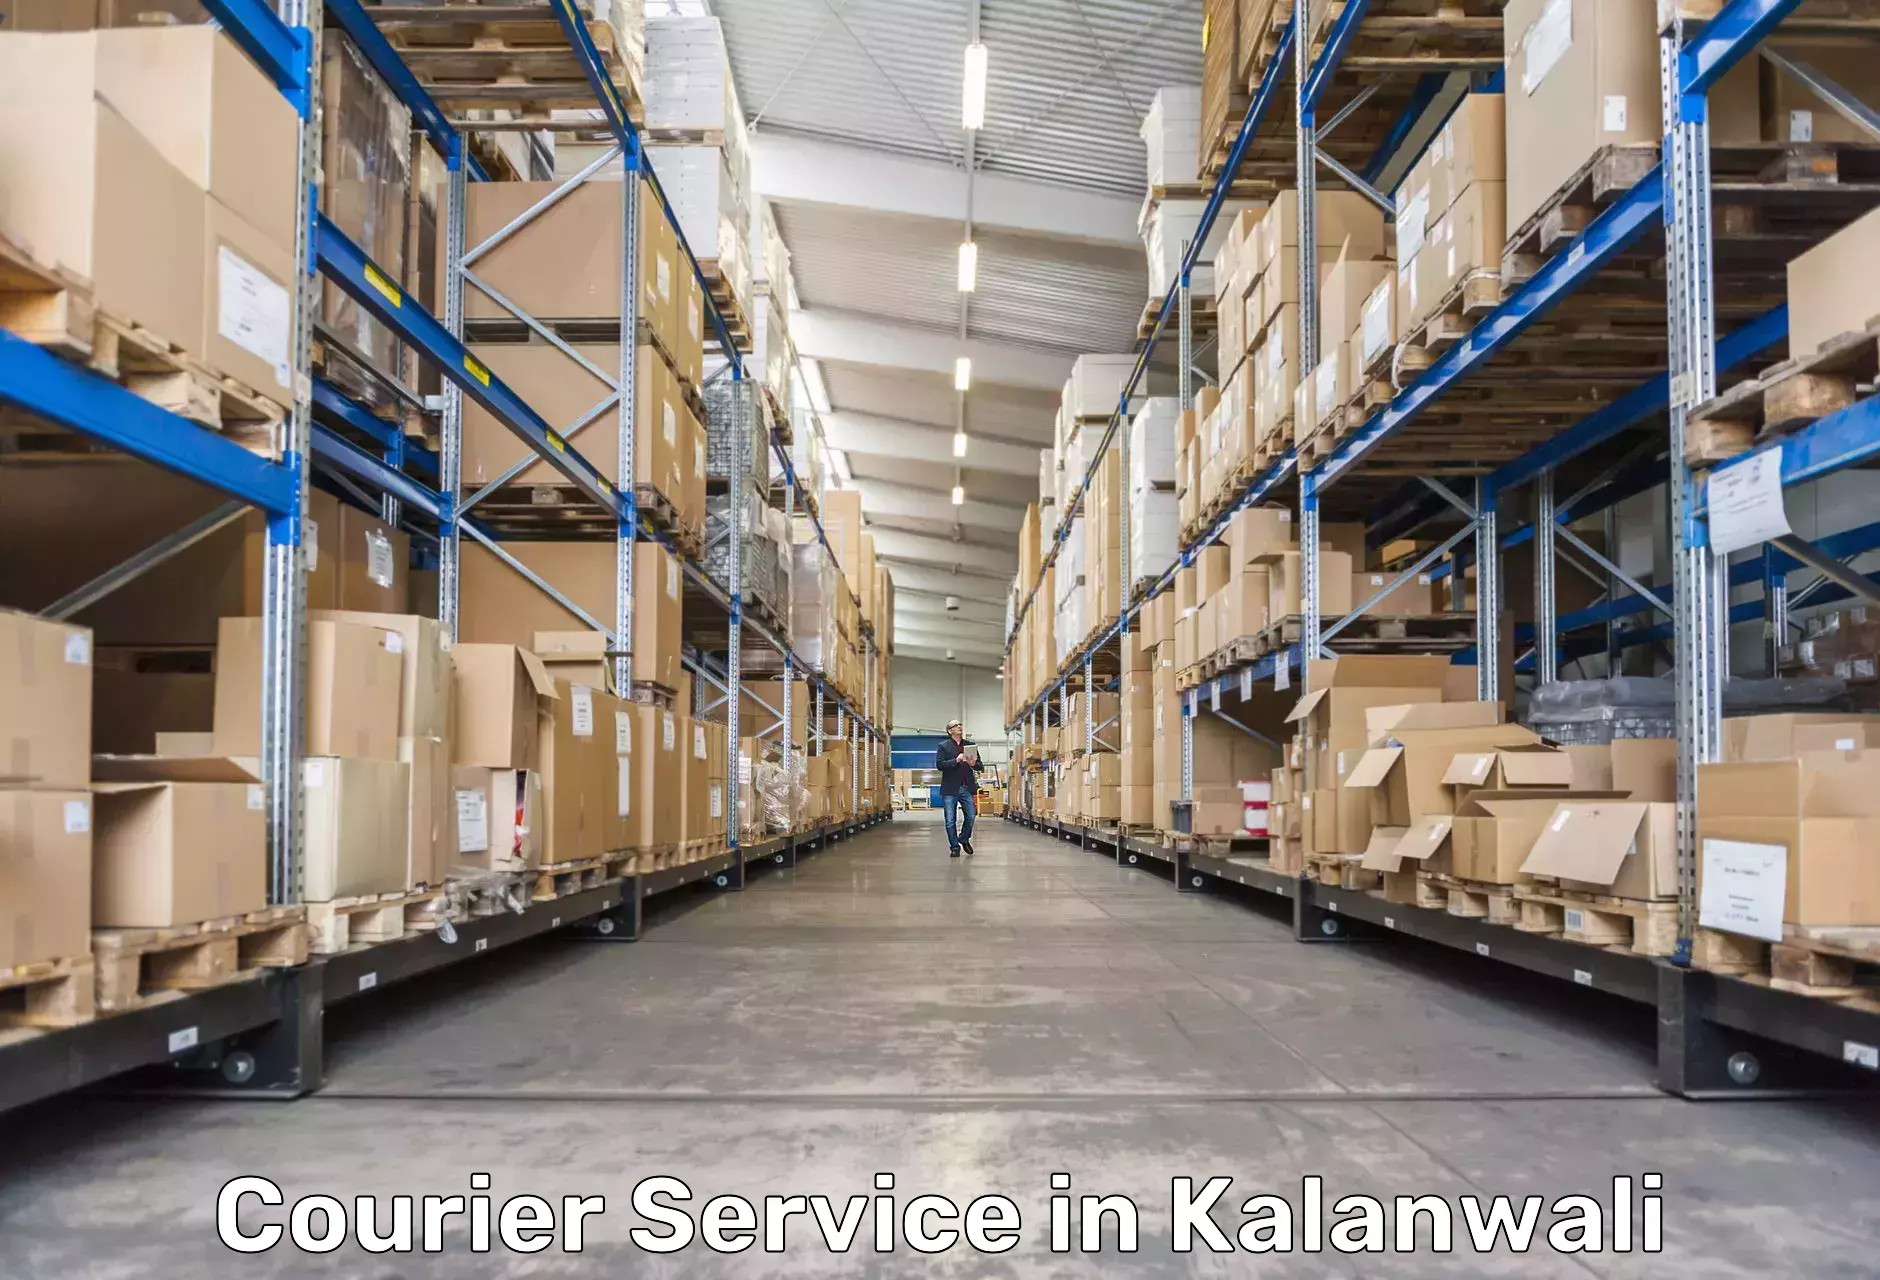 On-demand shipping options in Kalanwali